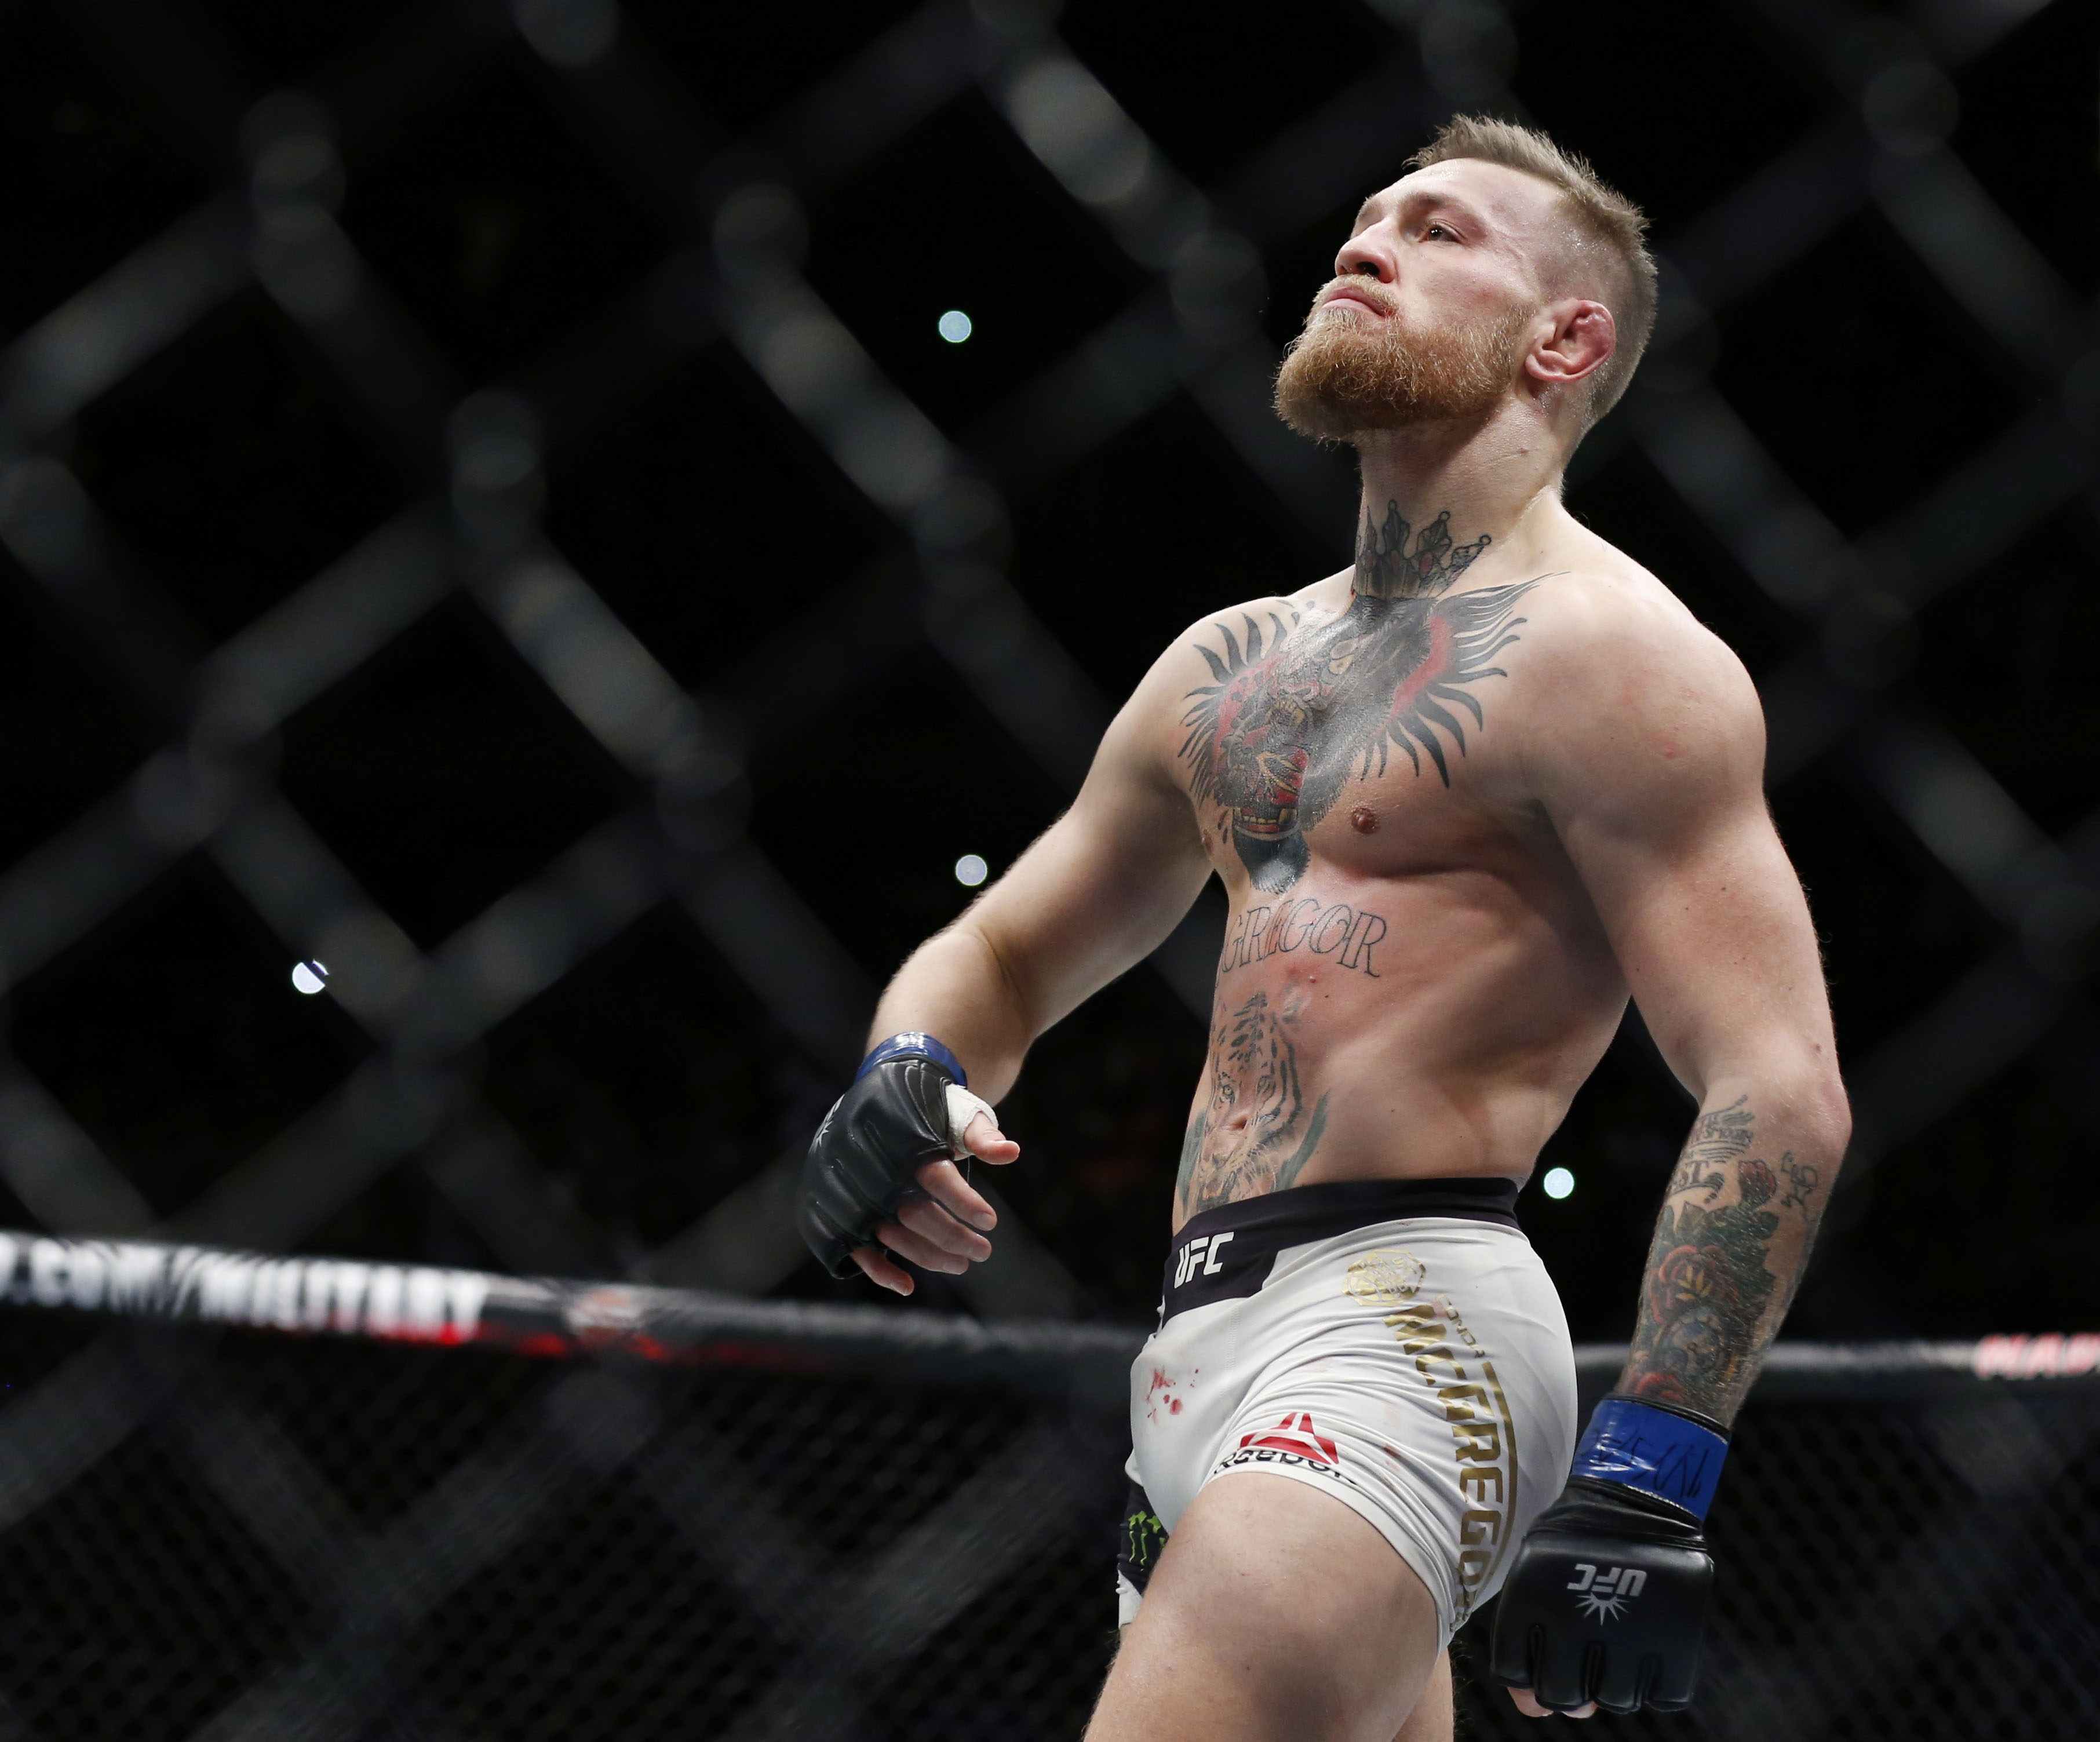 Conor McGregor, current UFC Lightweight Champion, watches the